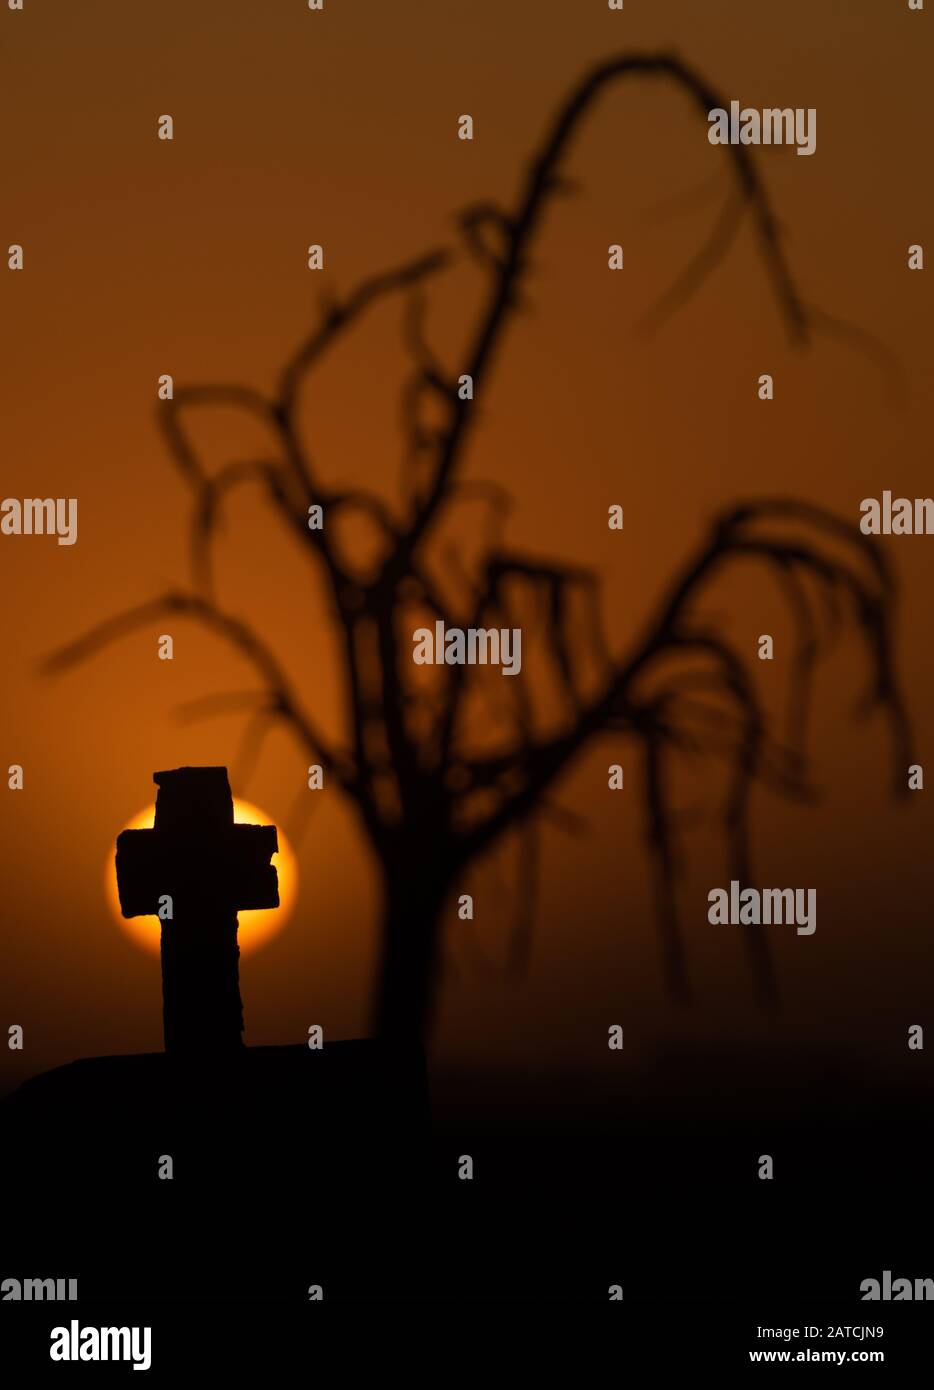 A spooky silhouette of cross and tree in a cemetery Stock Photo